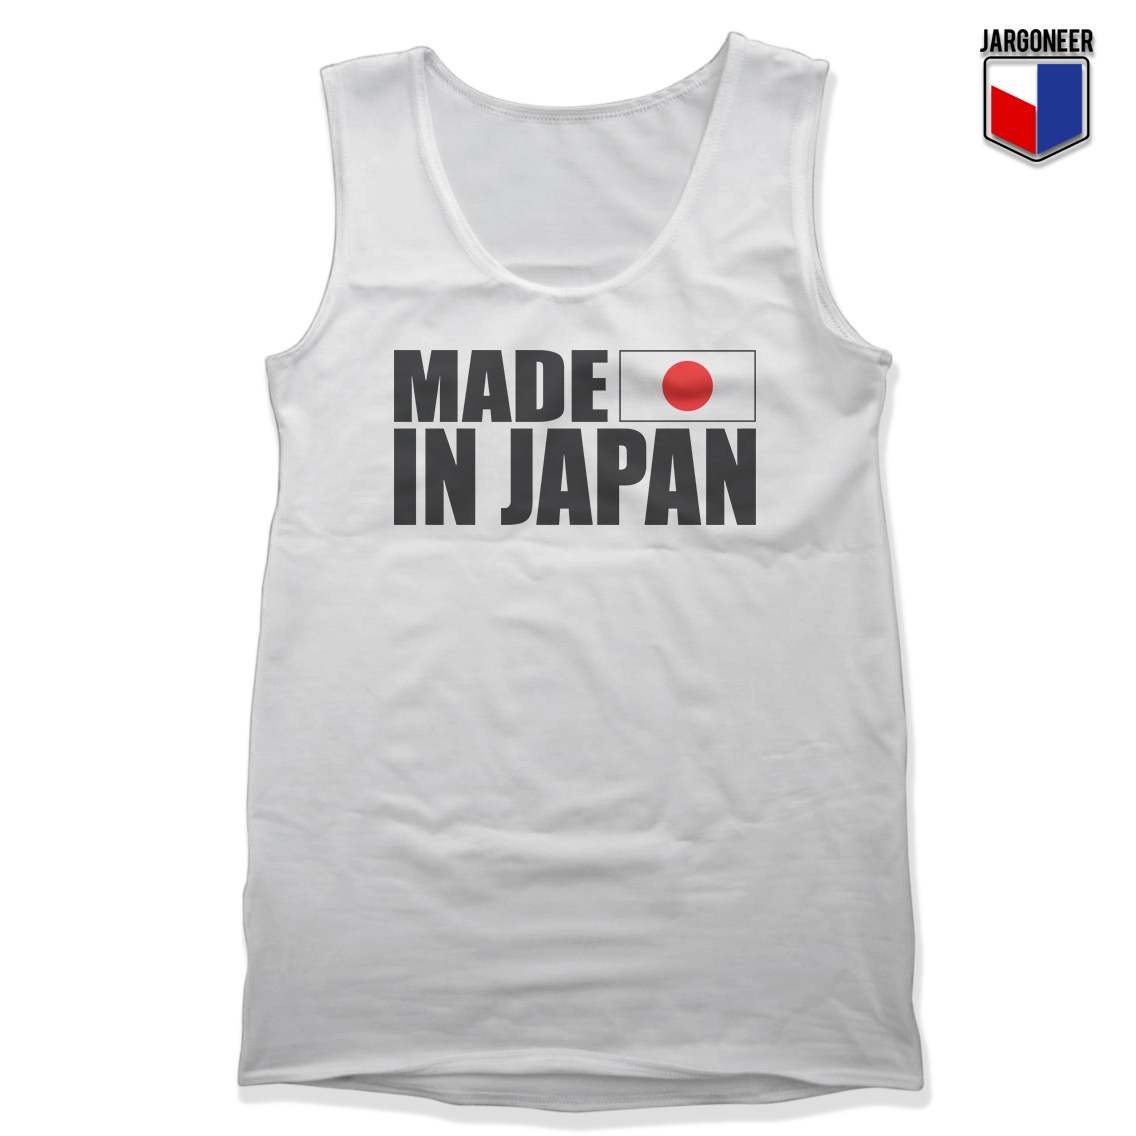 Made In Japan With Flag White Tank - Shop Unique Graphic Cool Shirt Designs